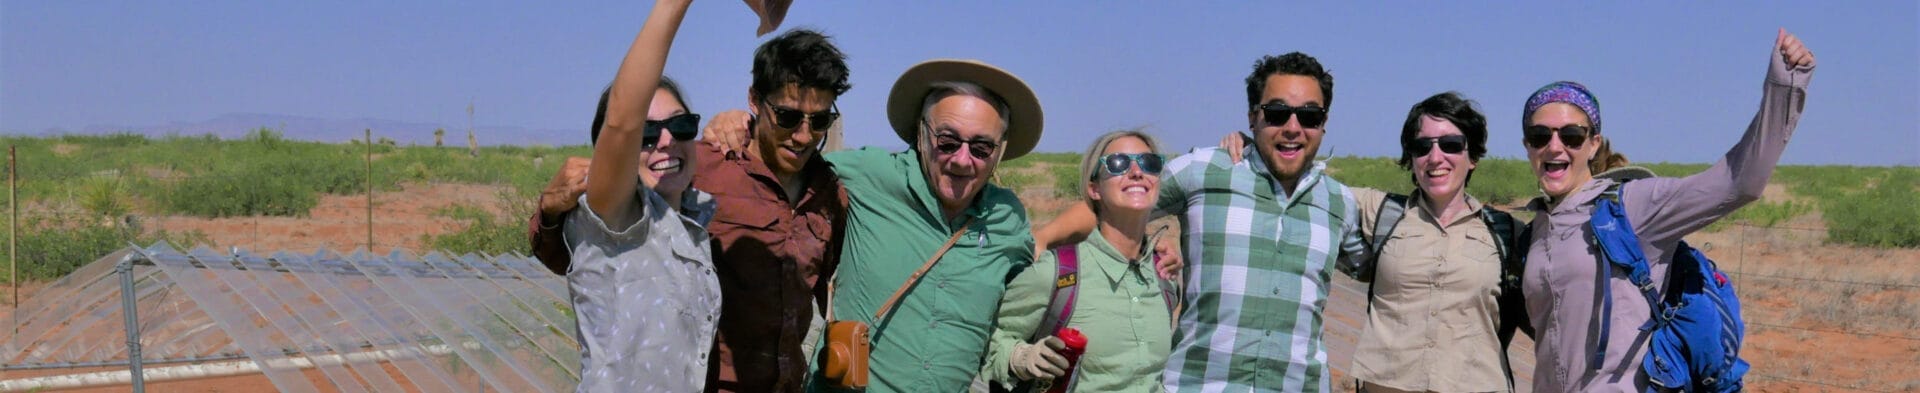 
		A group of seven people wearing sunglasses, smiling and laughing with their arms around each other. A desert landscape is visible in the background.		